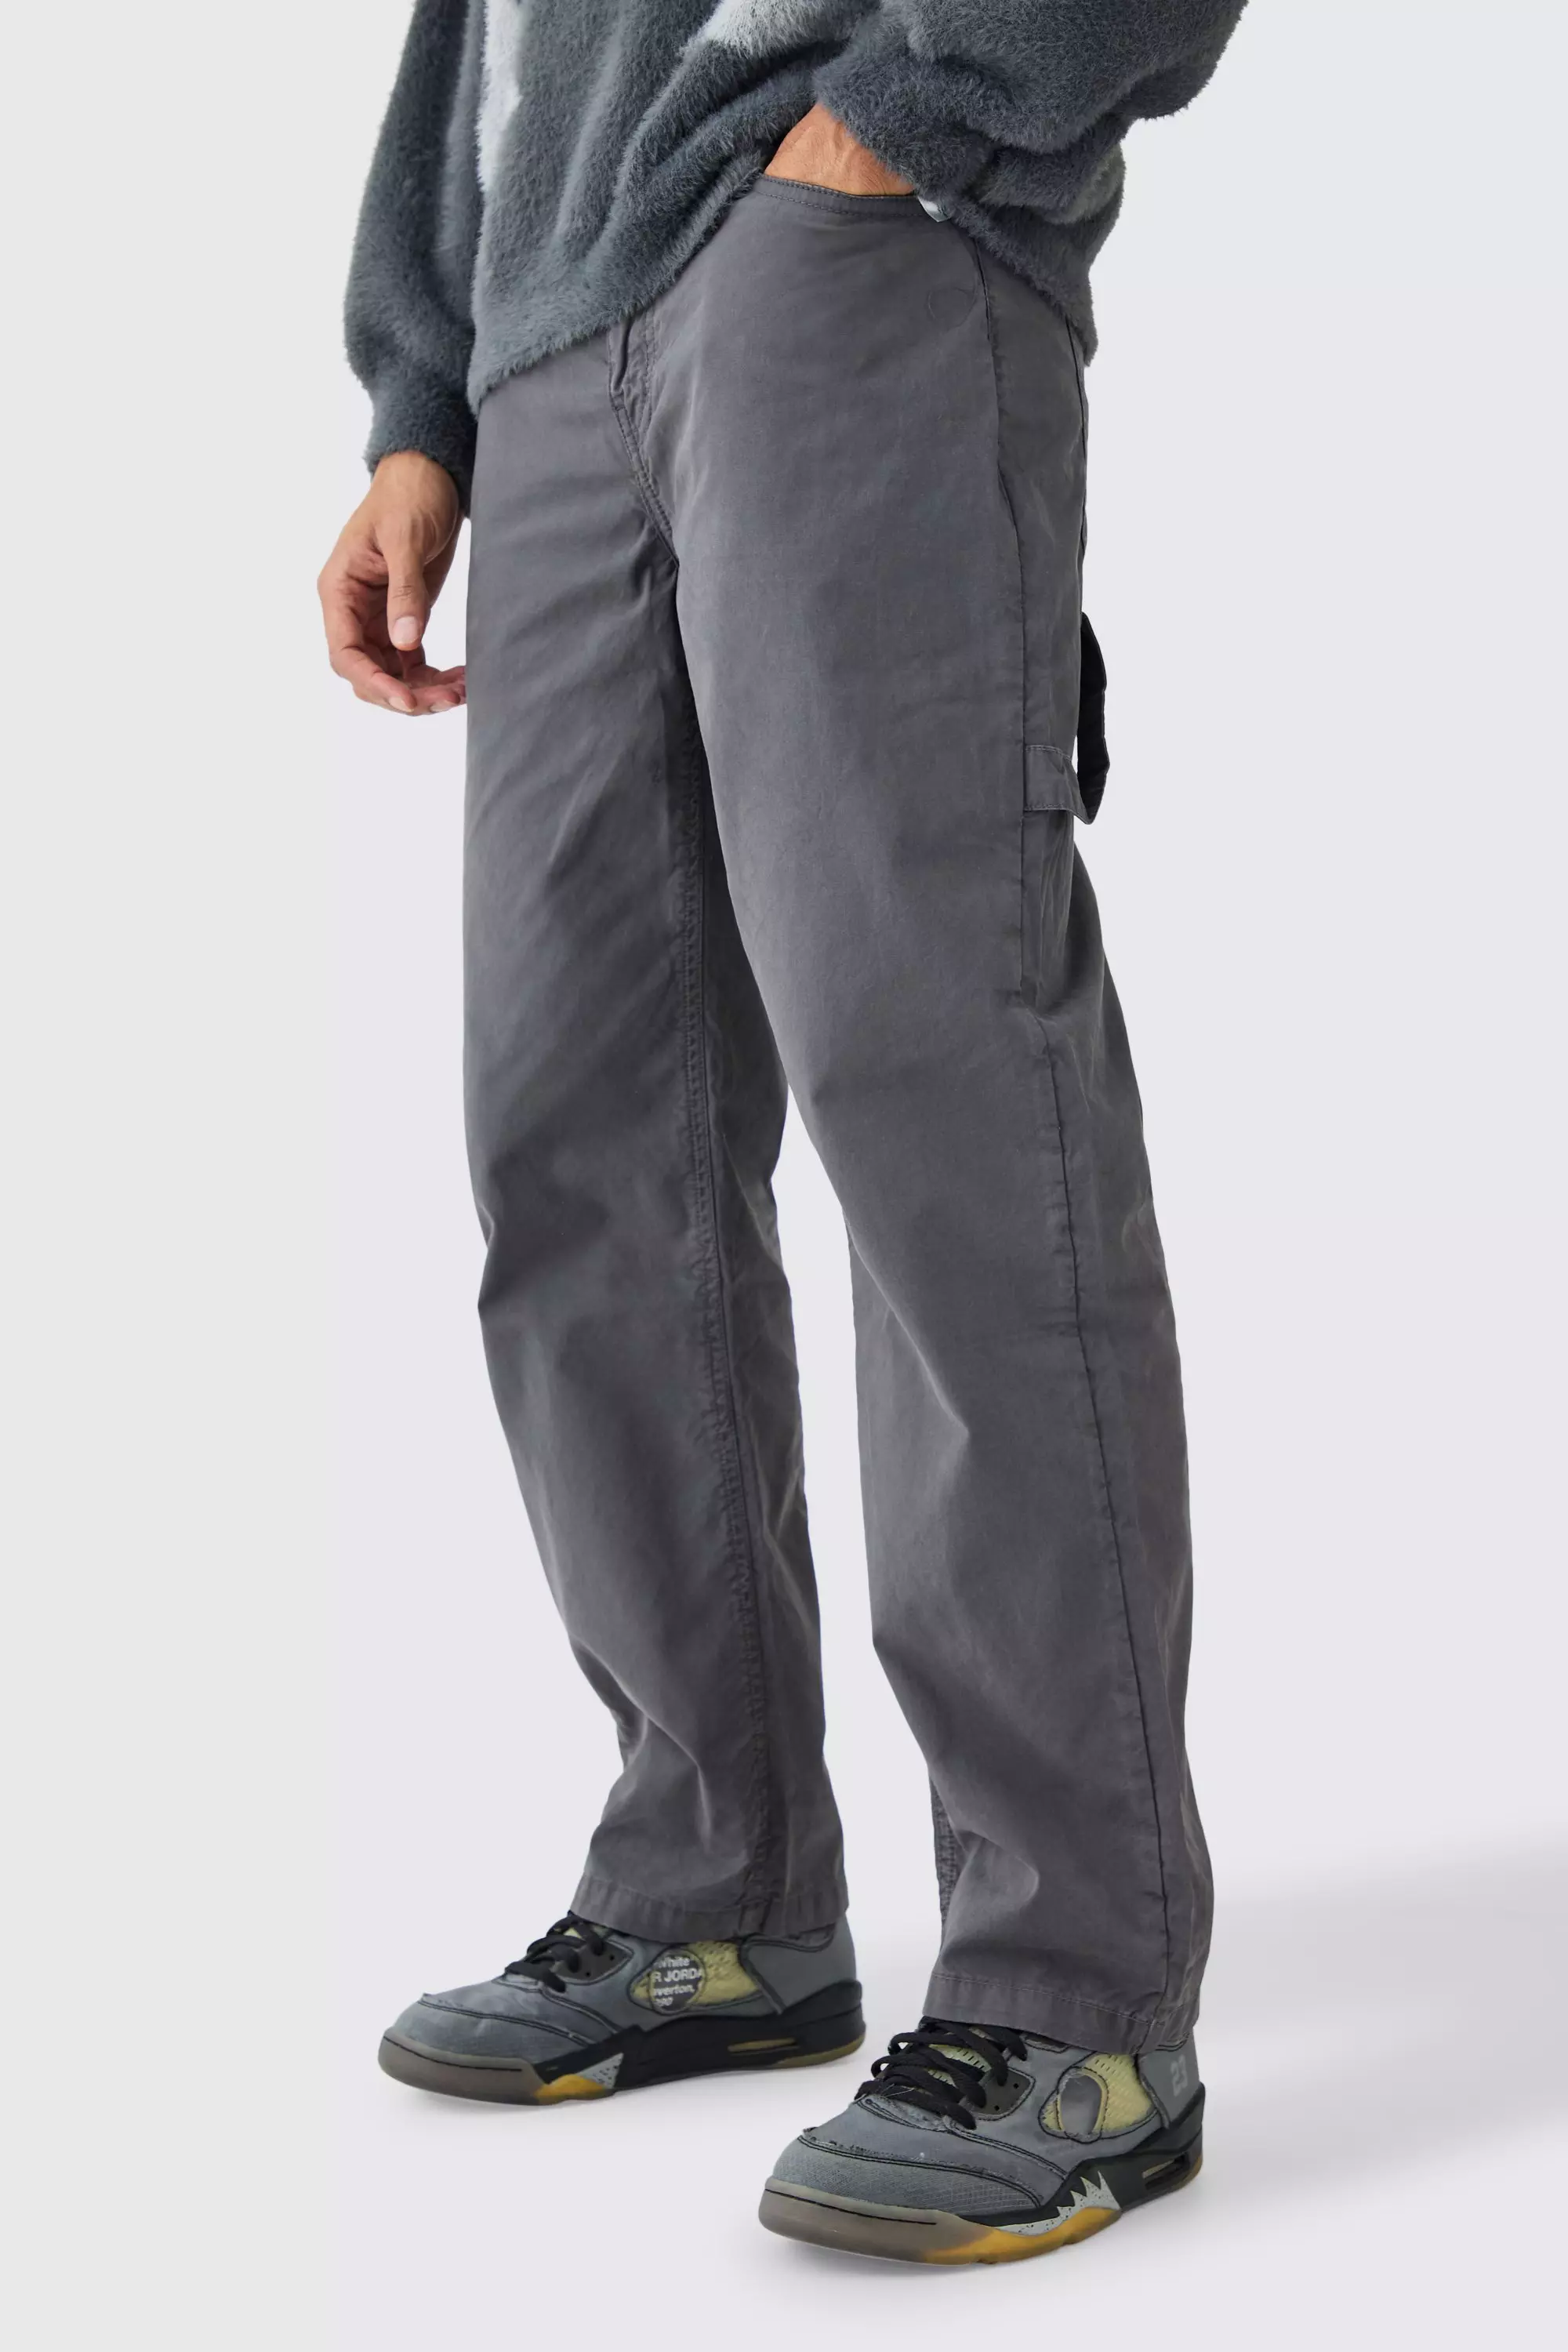 Charcoal Grey Fixed Waist Washed Relaxed Fit Carpenter Trouser